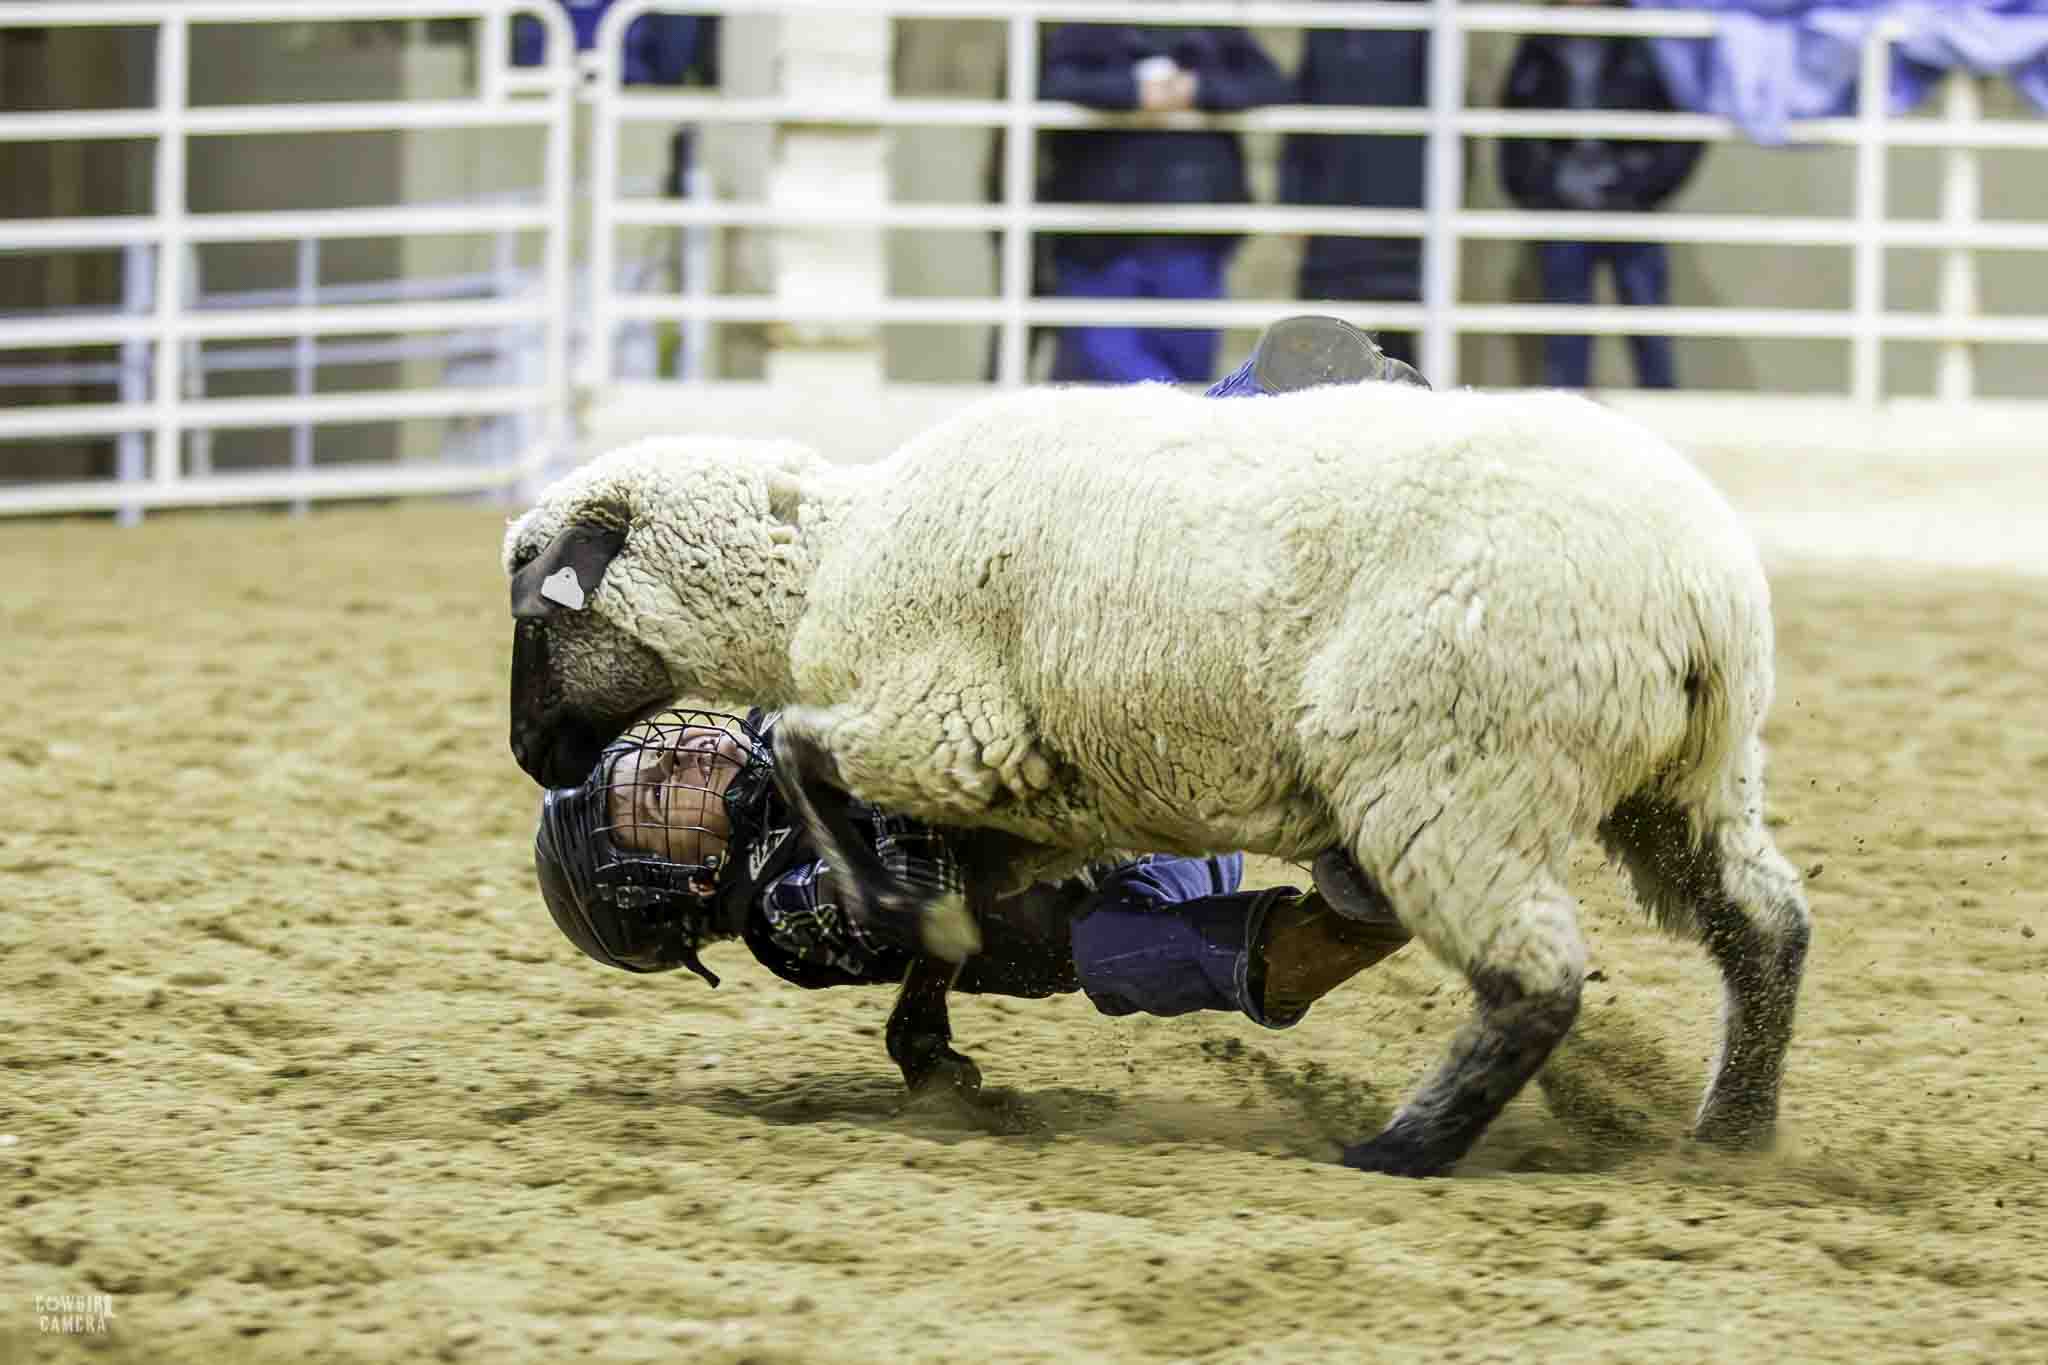 Mutton Buster still hanging on upside down